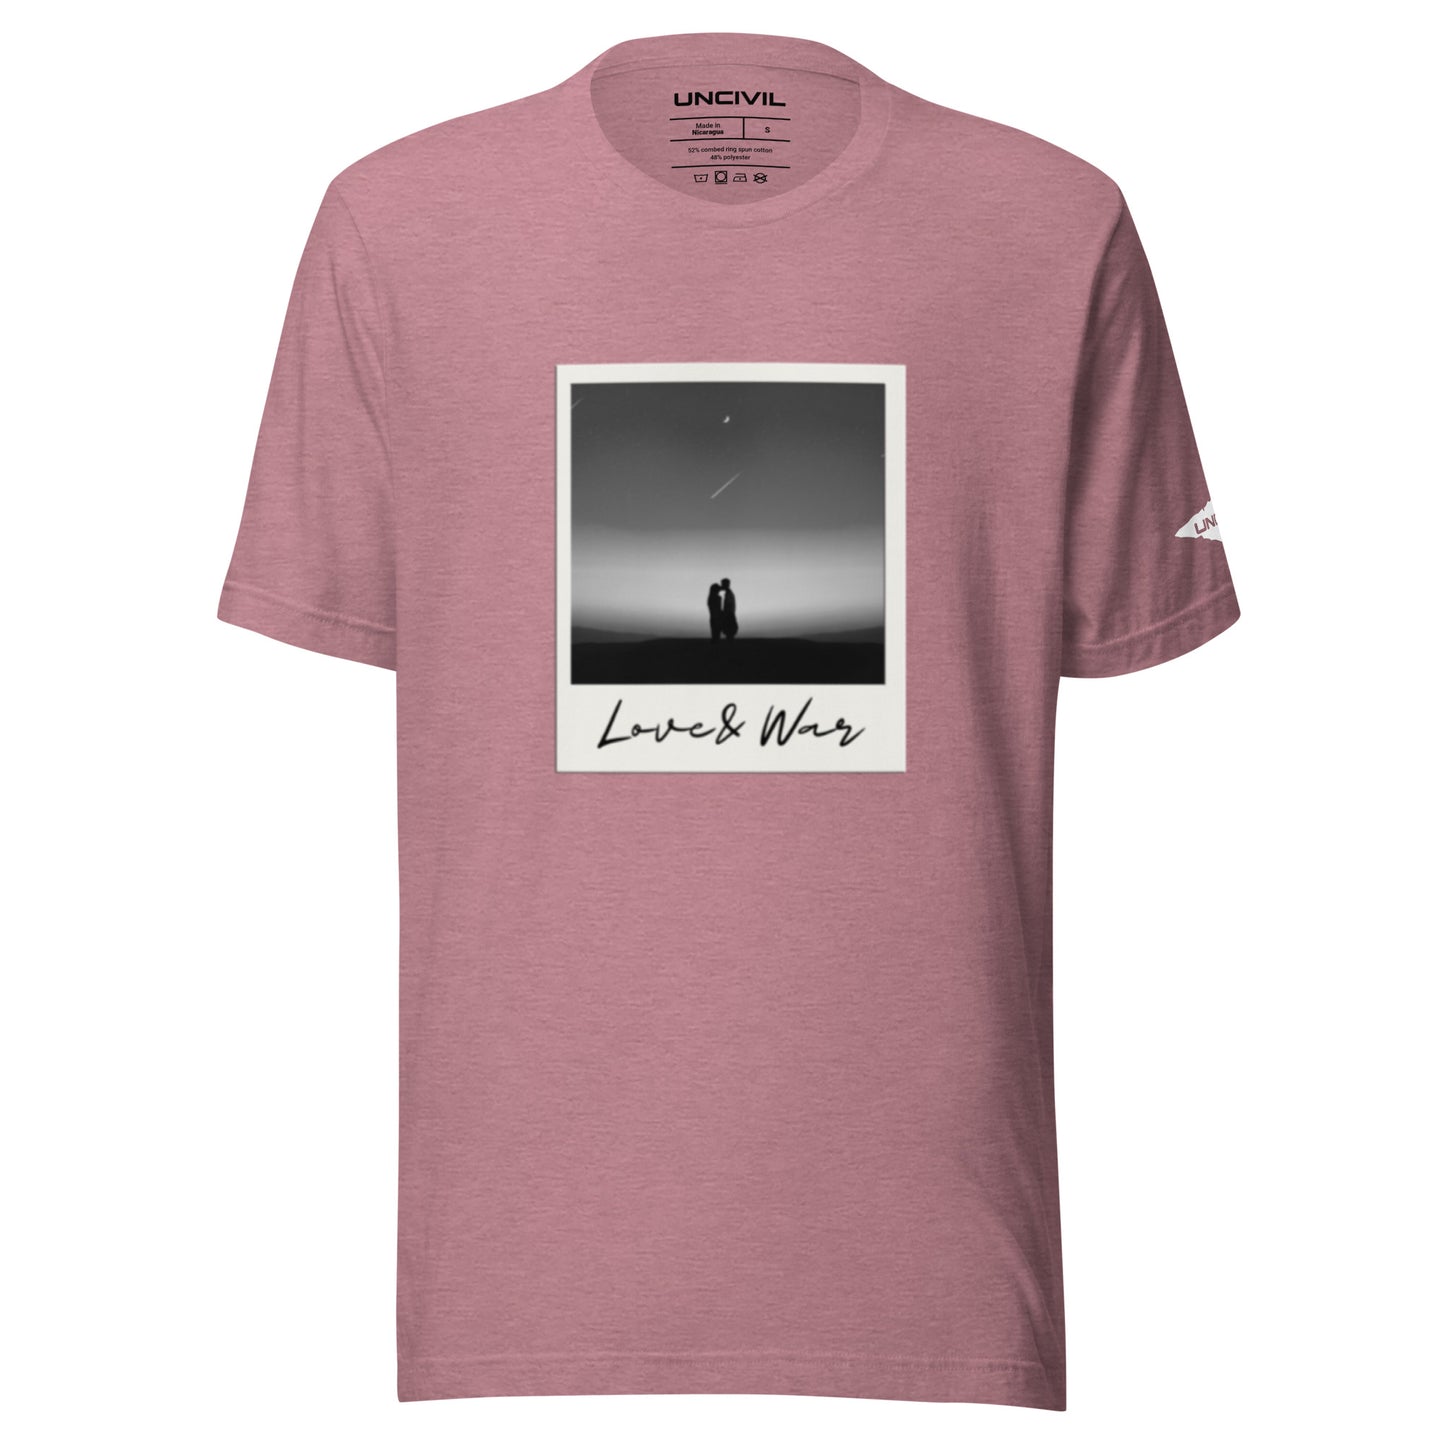 Love and War shirt. Featuring a Polaroid photo of a couple in black and white. Heather pink unisex shirt.